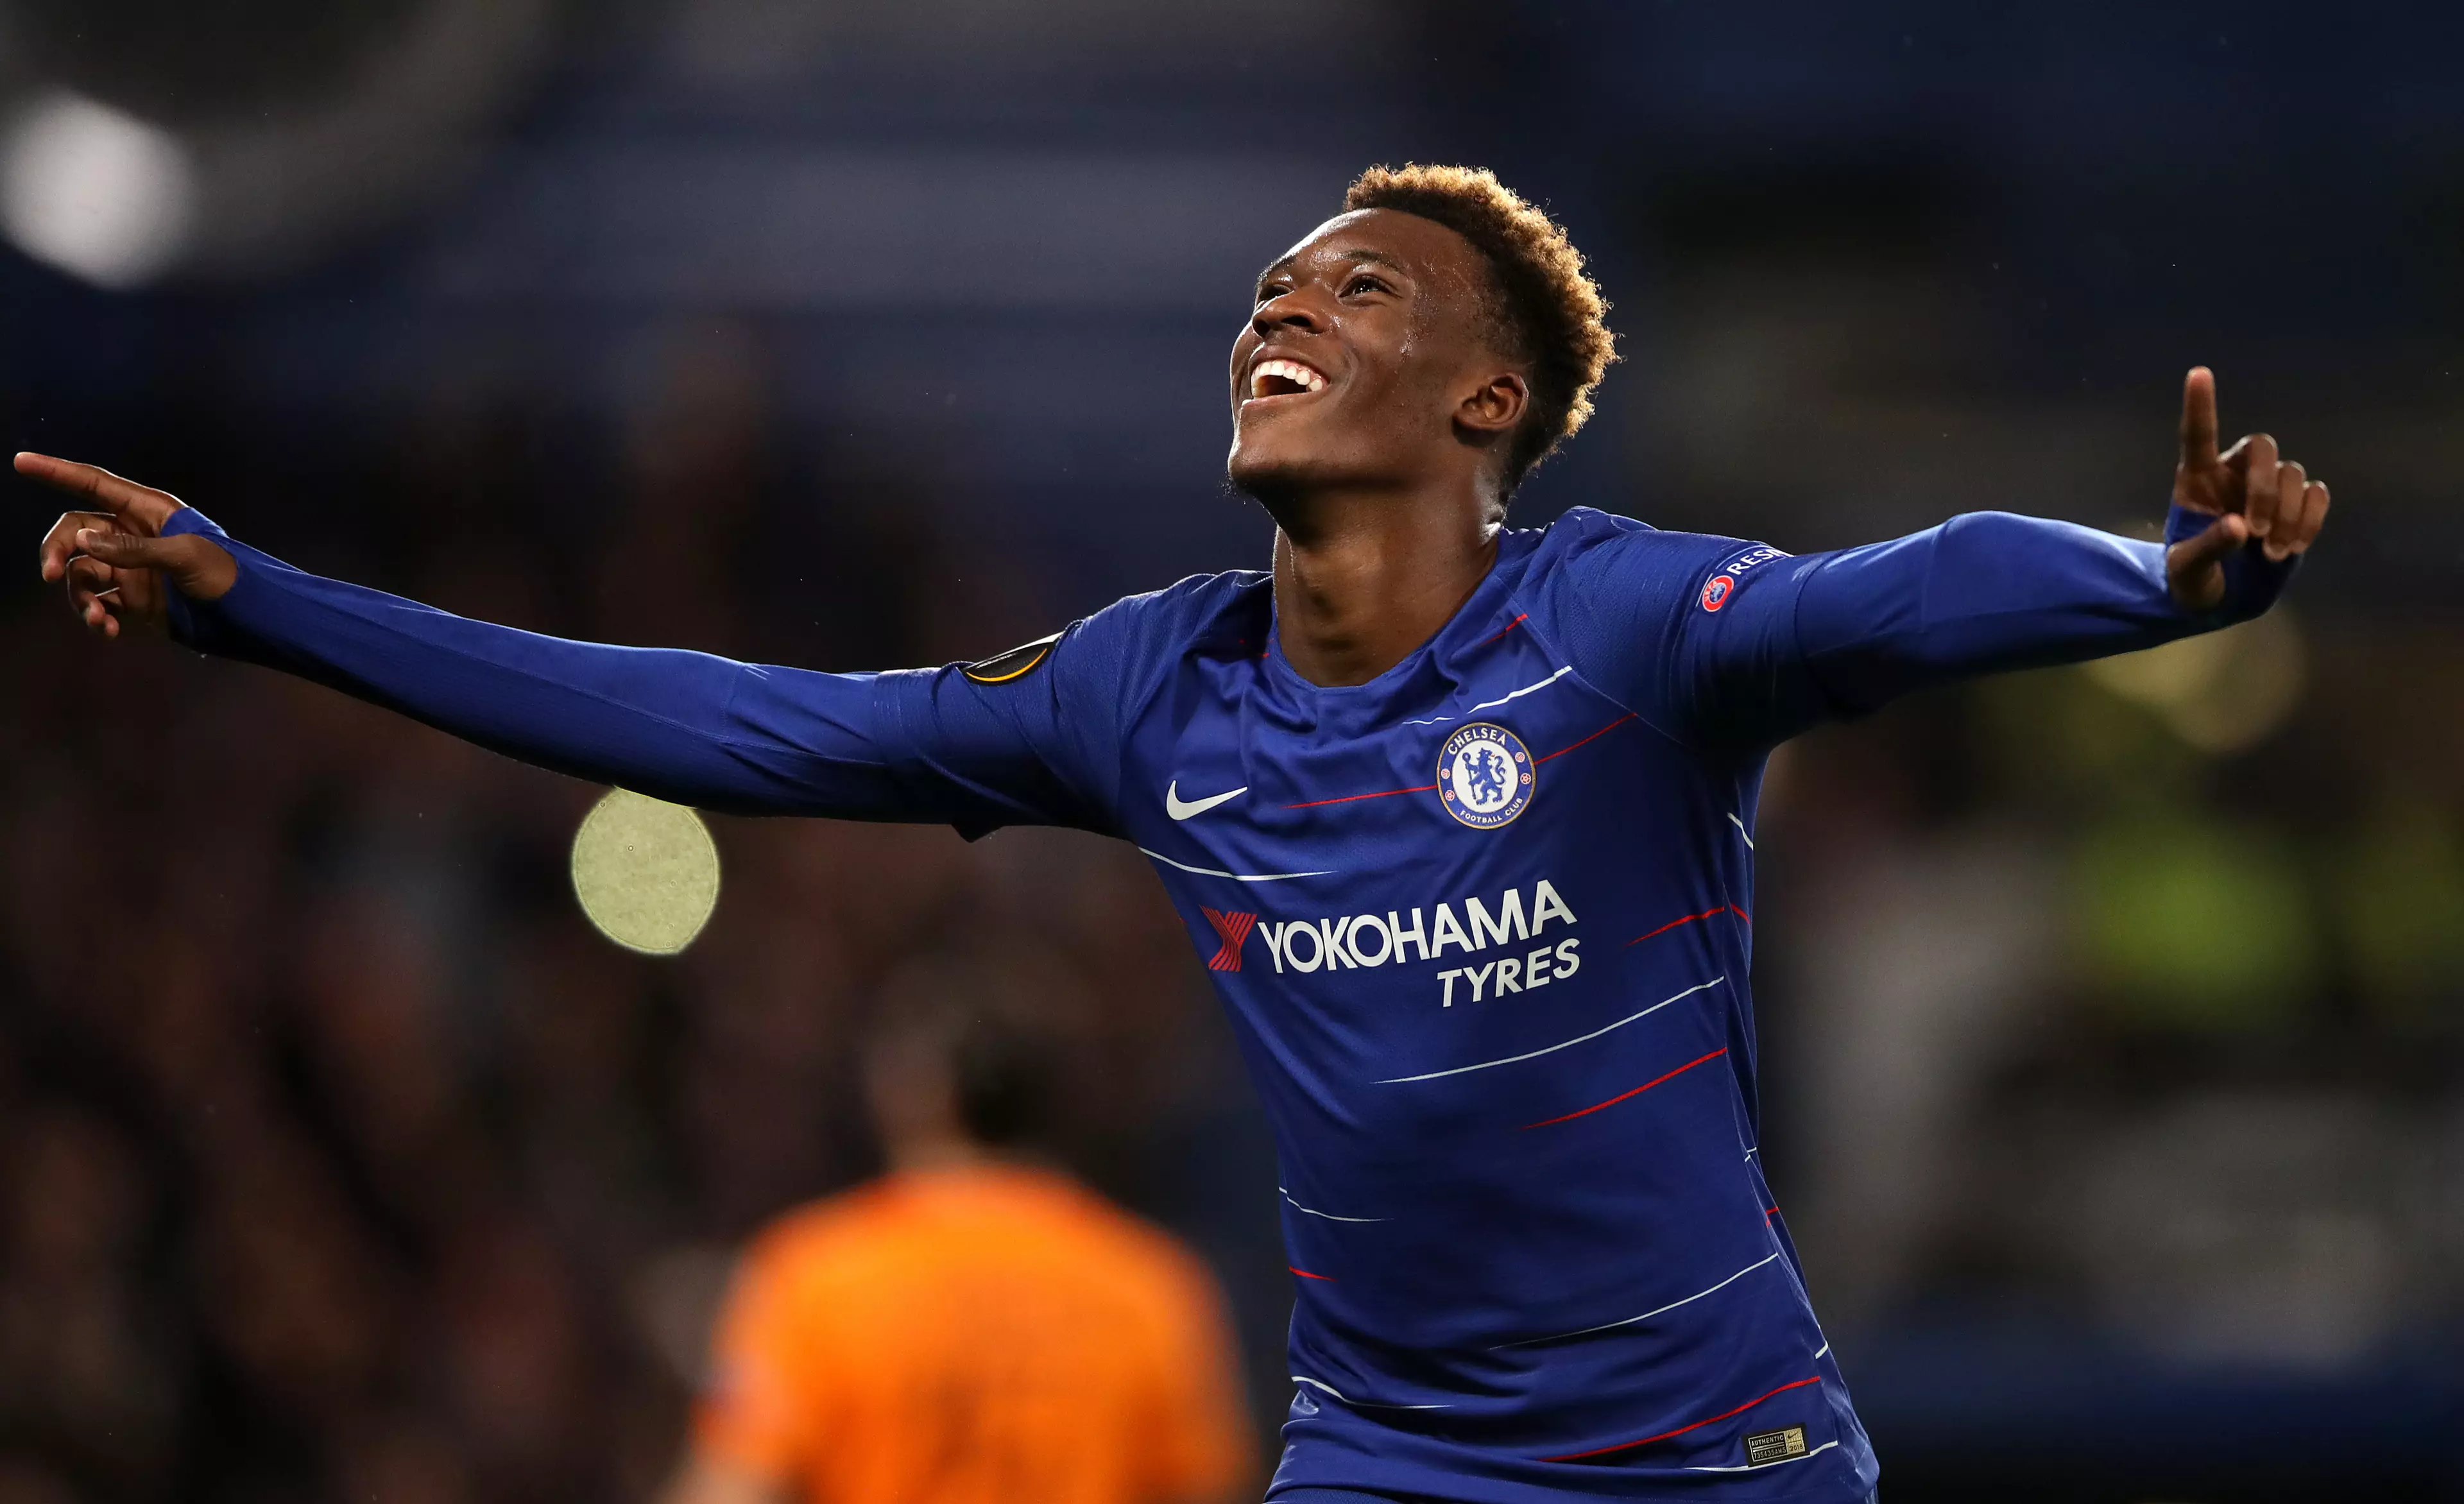 Hudson-Odoi was the subject of an offer from Bayern Munich. Image: PA Images